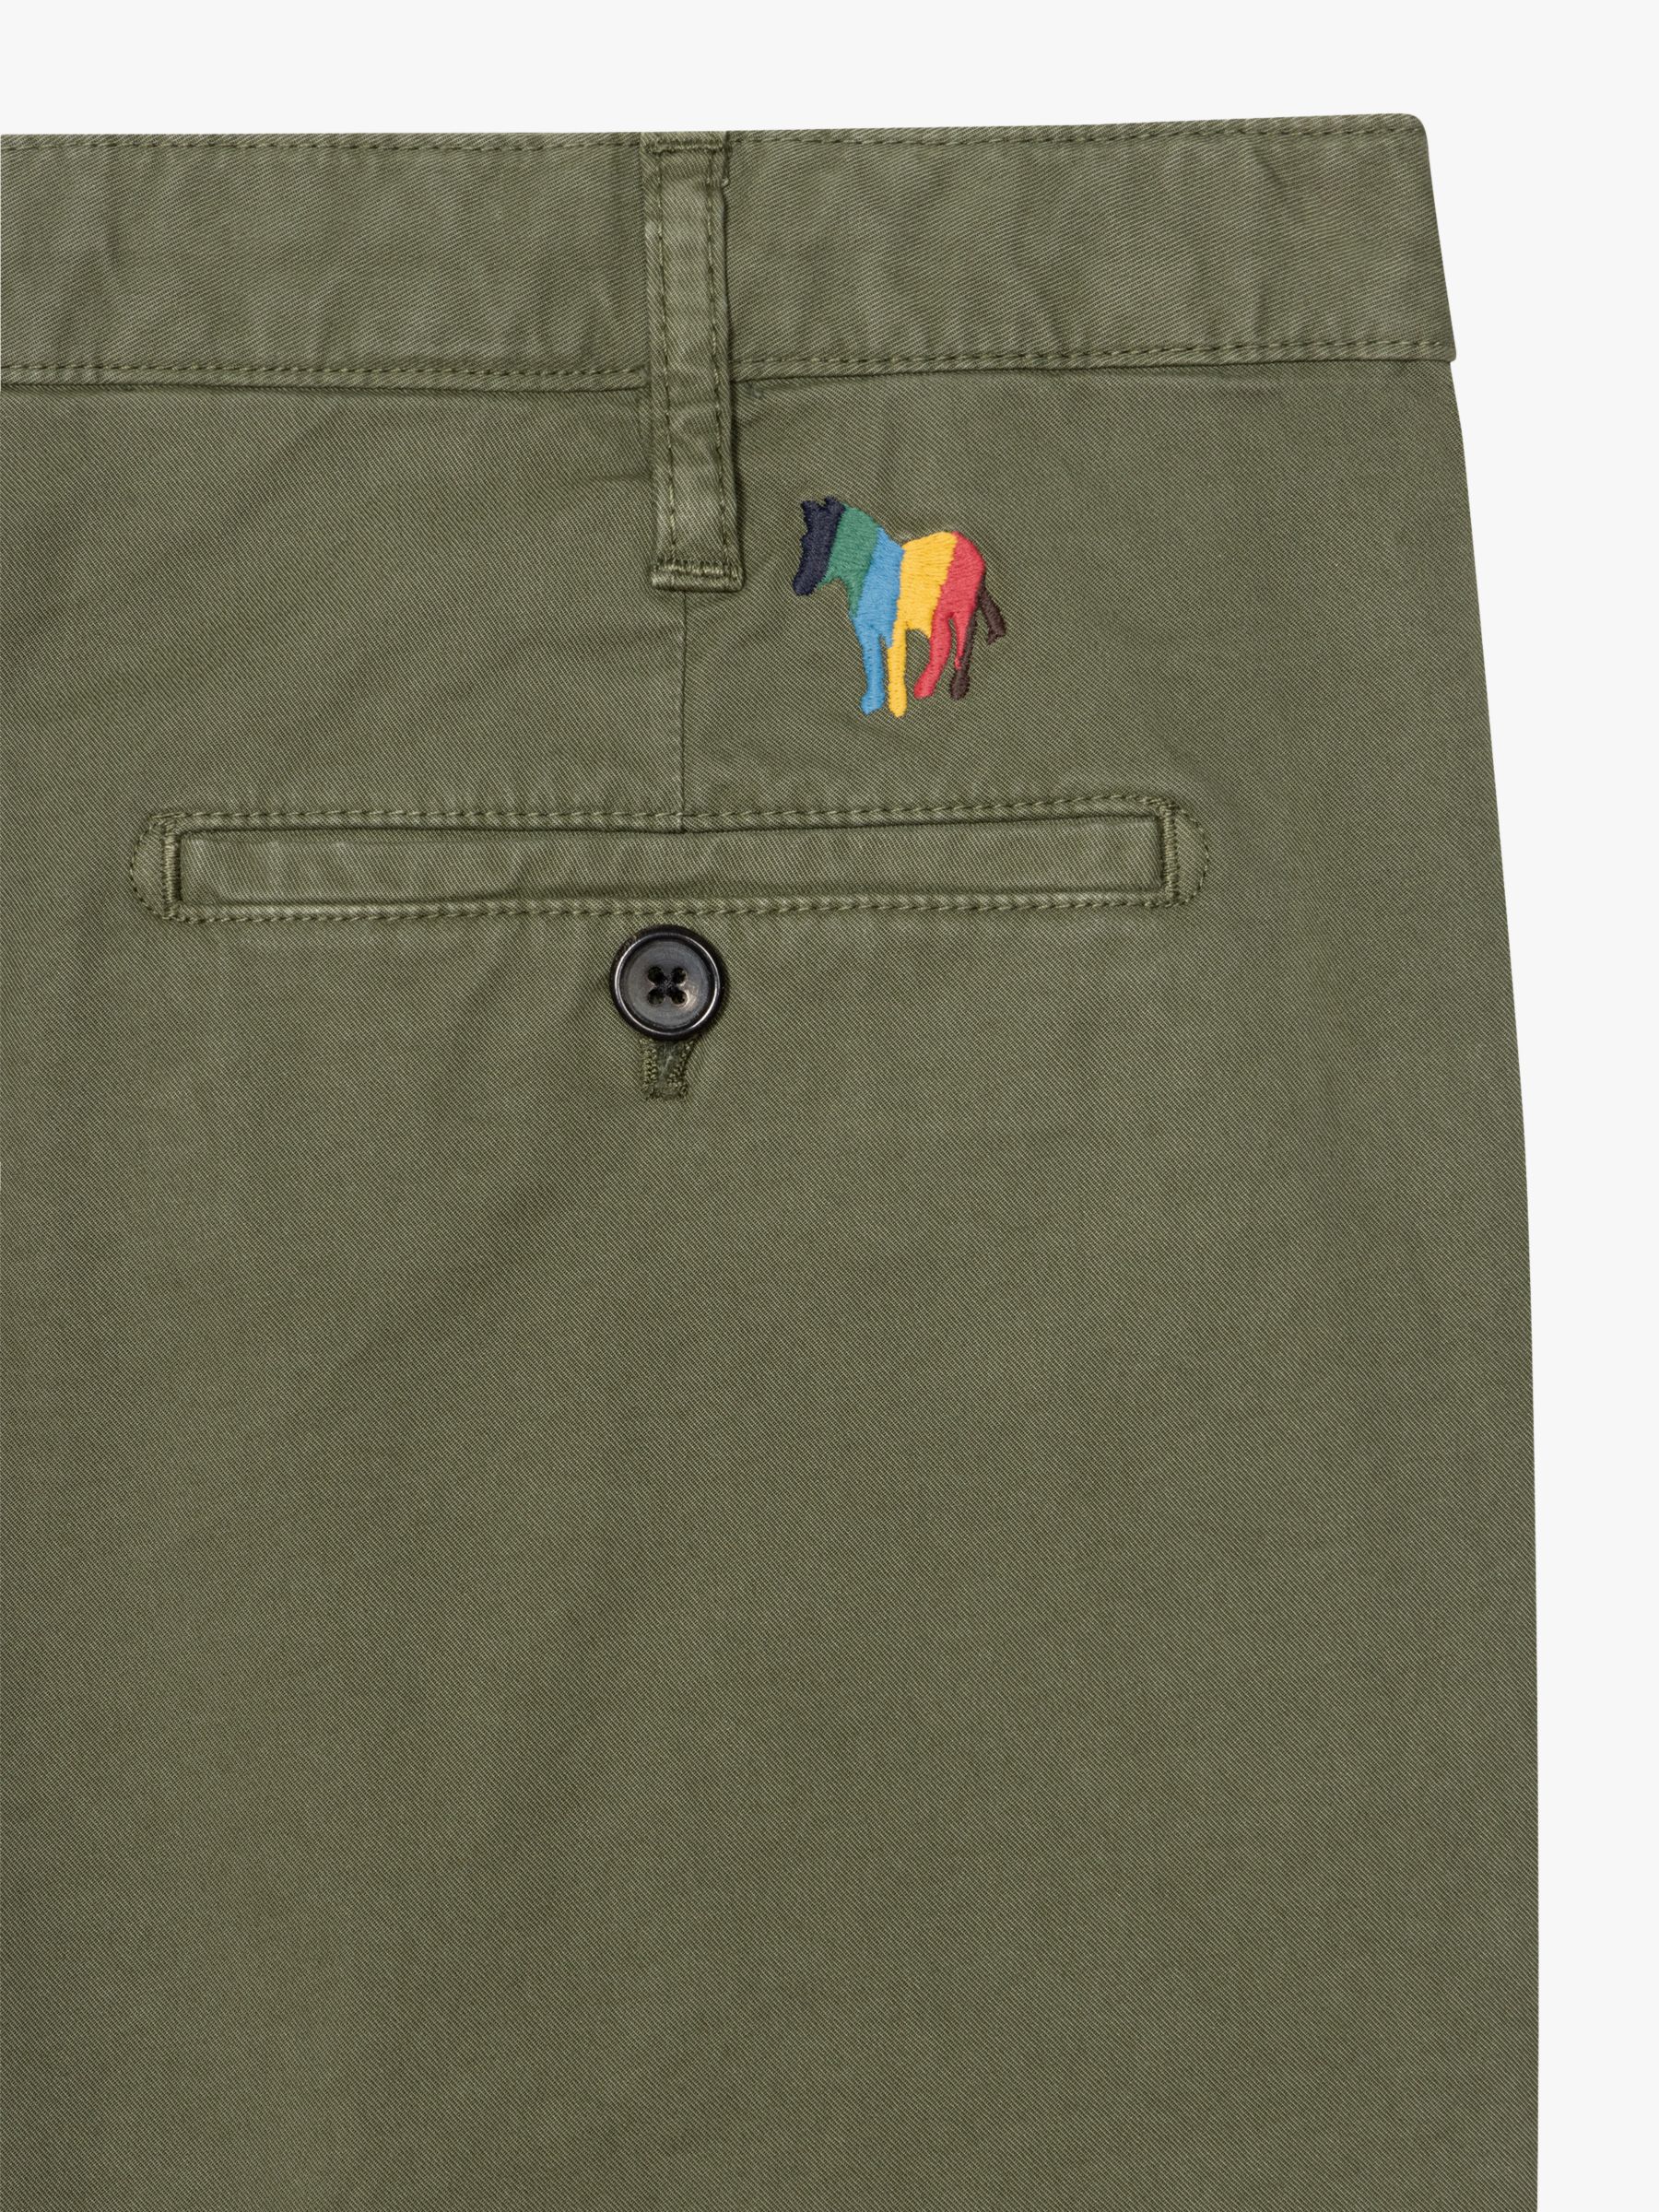 Buy PS Paul Smith Mid Fit Clean Chino Shorts Online at johnlewis.com